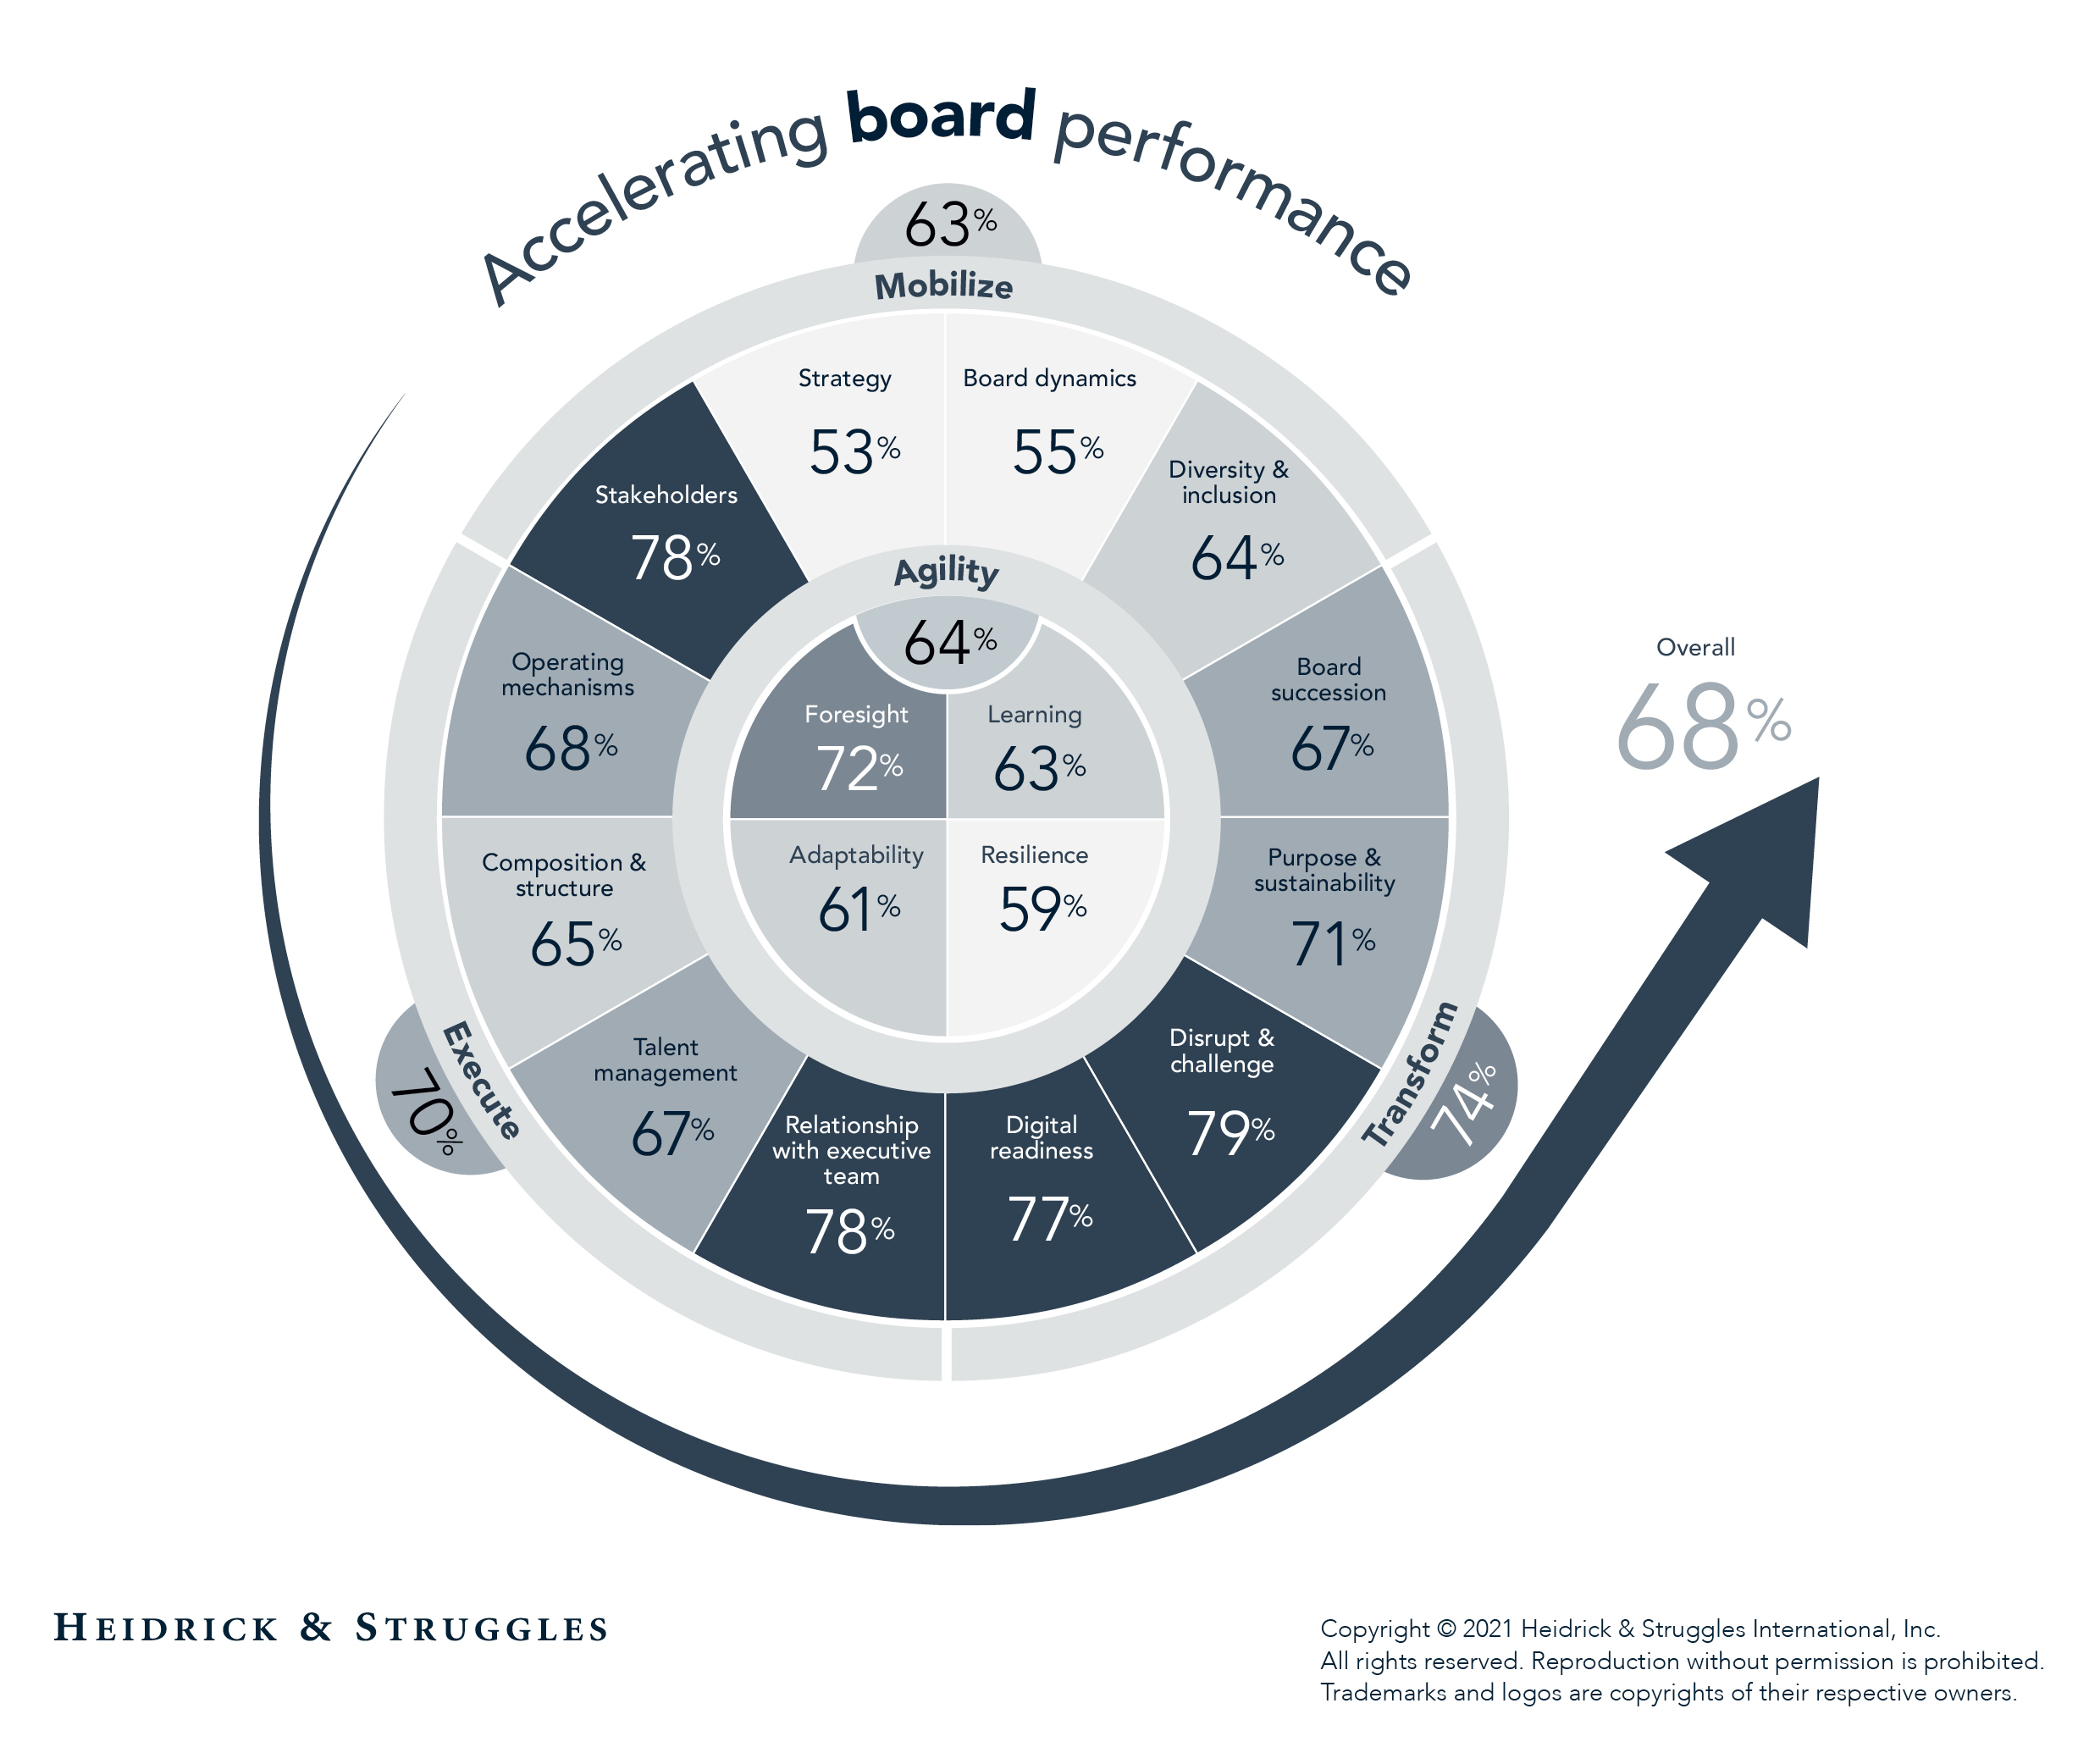 How US insurers can improve board effectiveness - chart image